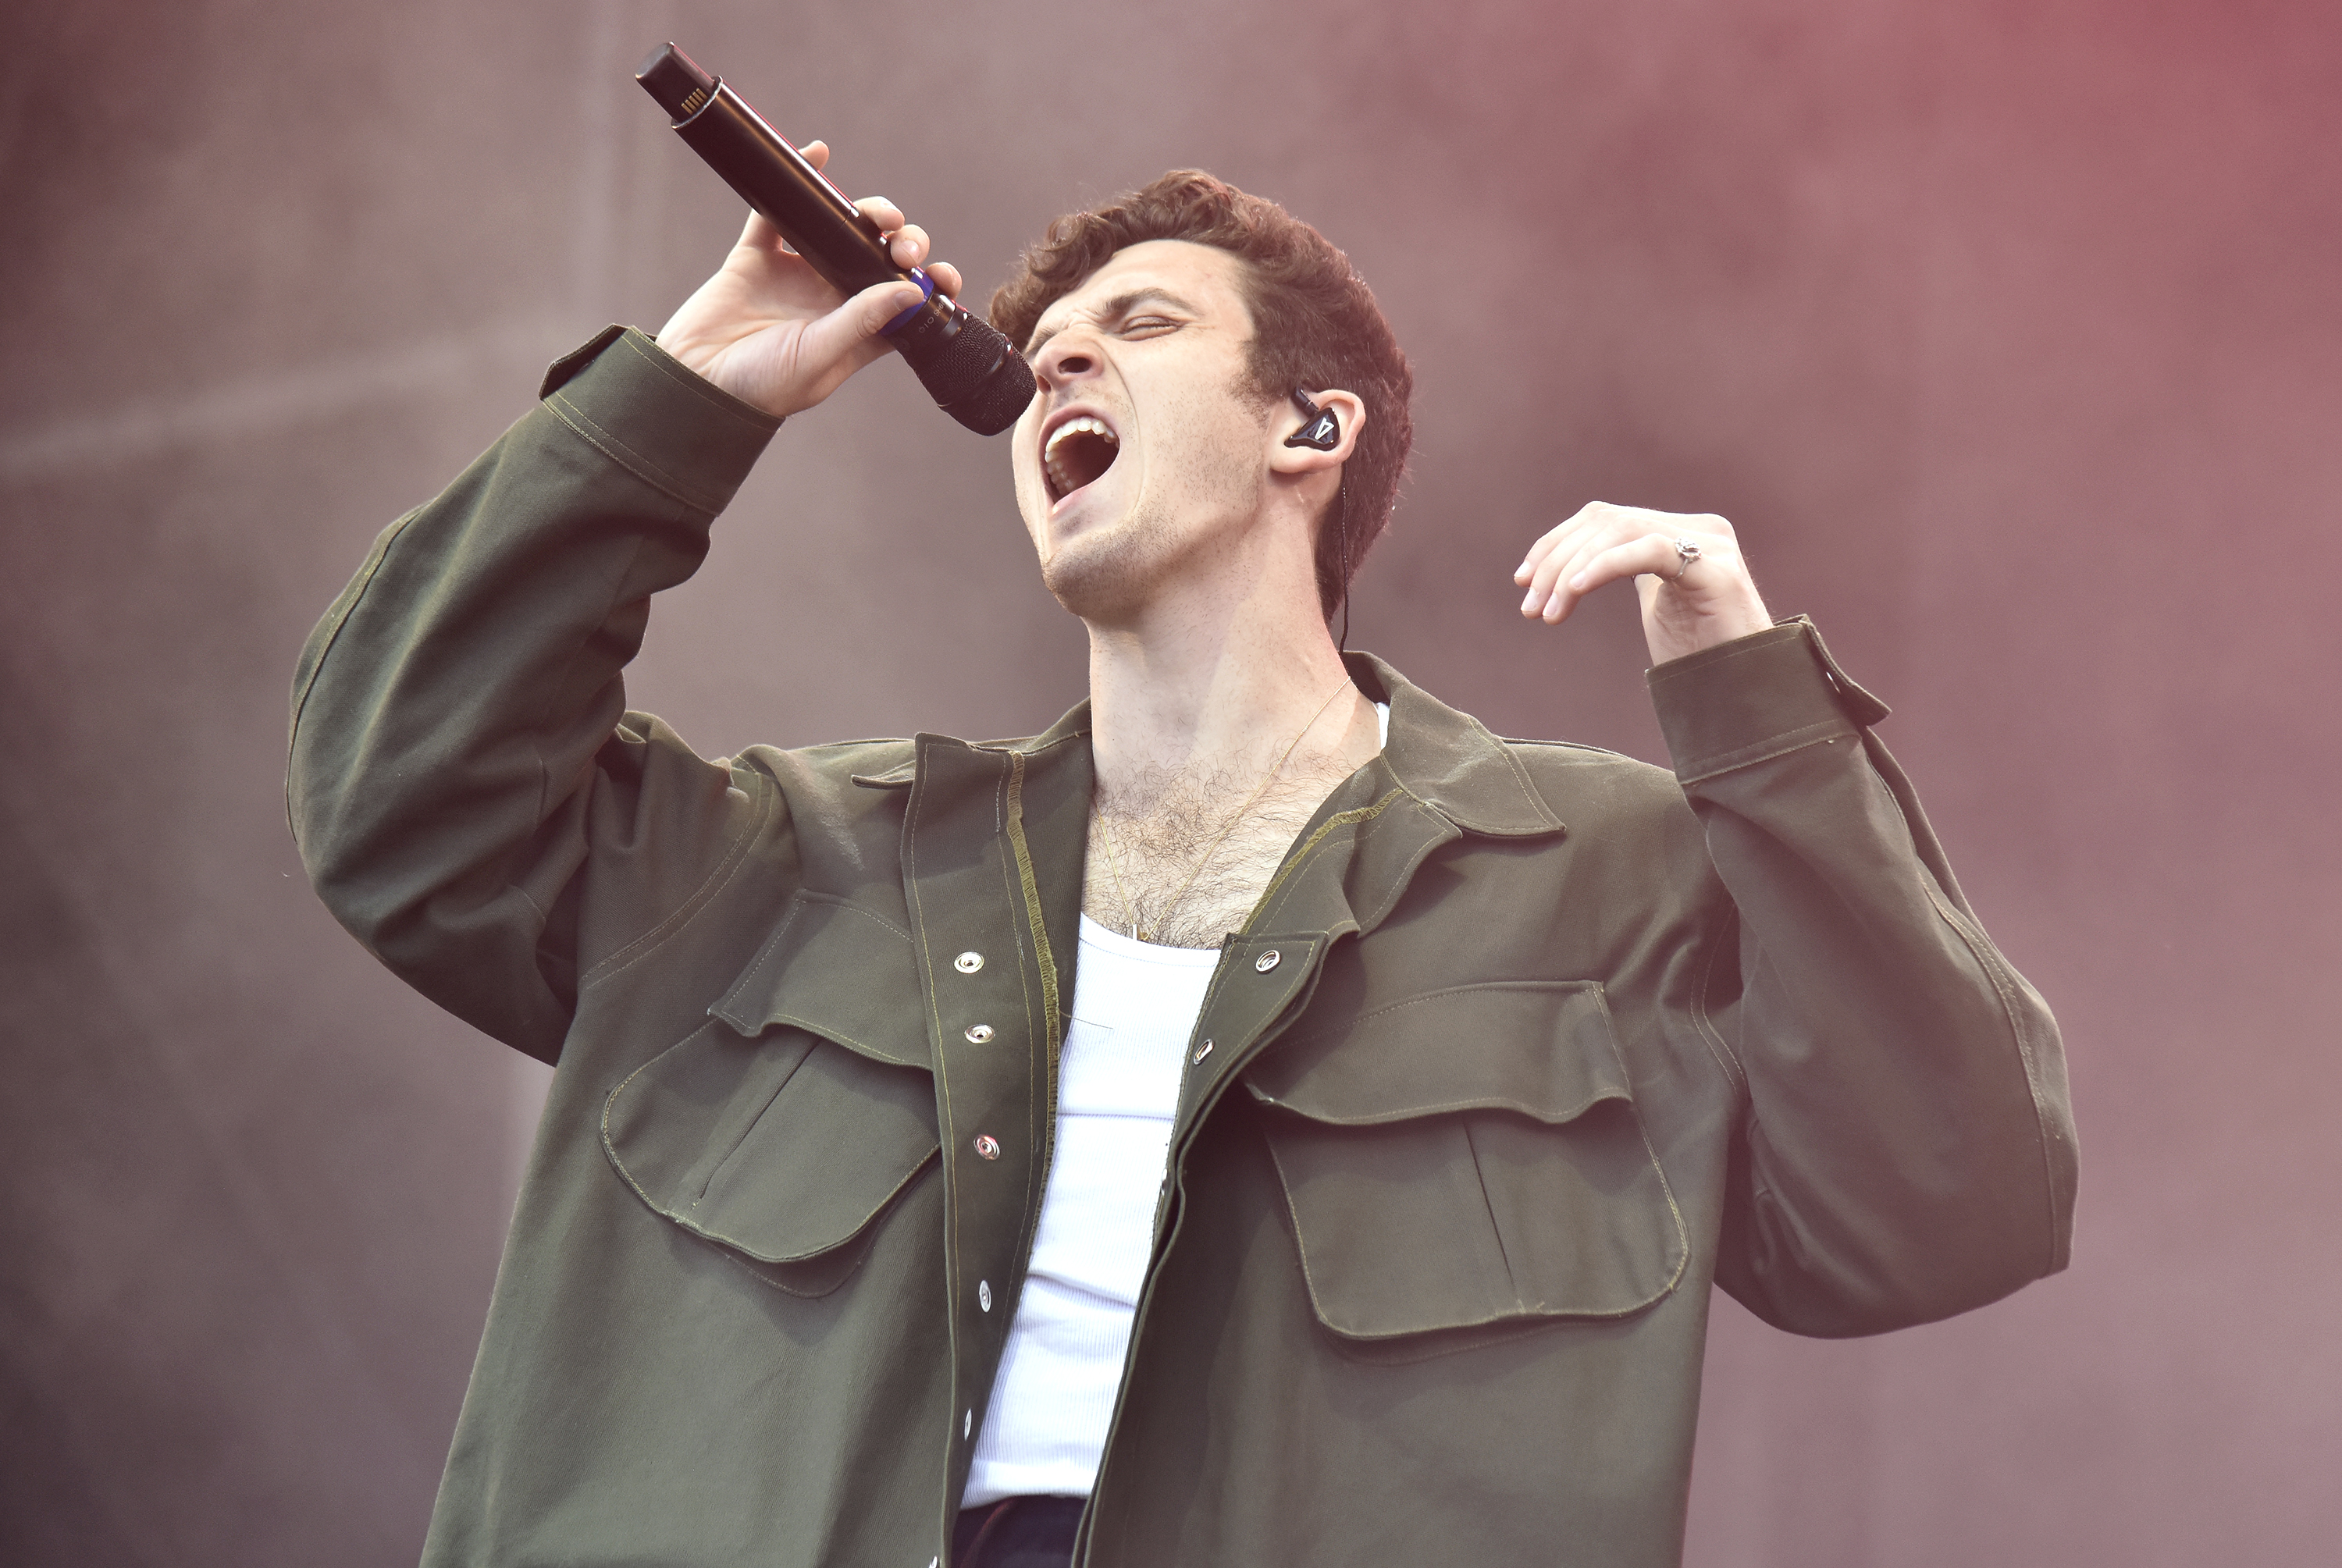 Lauv performs during the 2018 Outside Lands Music and Arts festival at Golden Gate Park on August 10, 2018 in San Francisco, California. (Tim Mosenfelder—Getty Images)